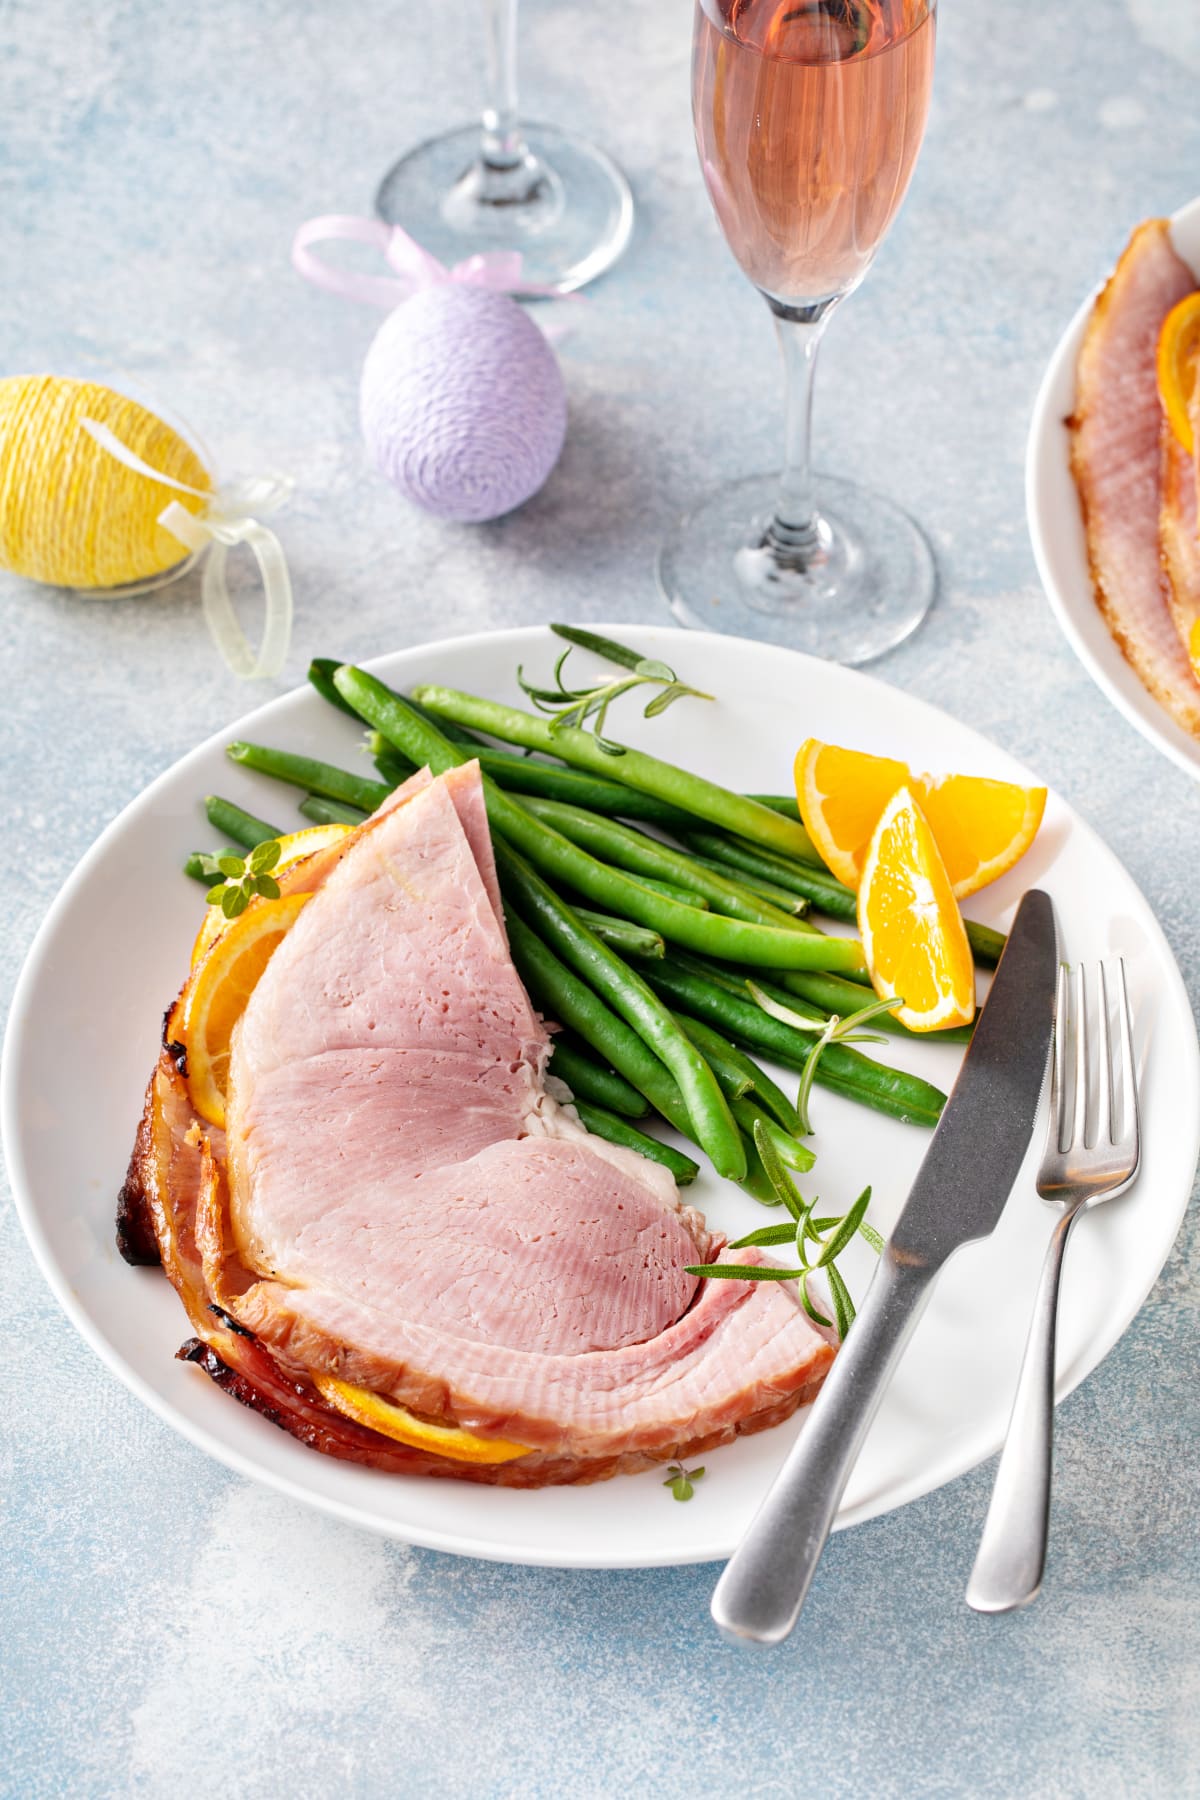 slices of heated baked ham served with green beans for Eater